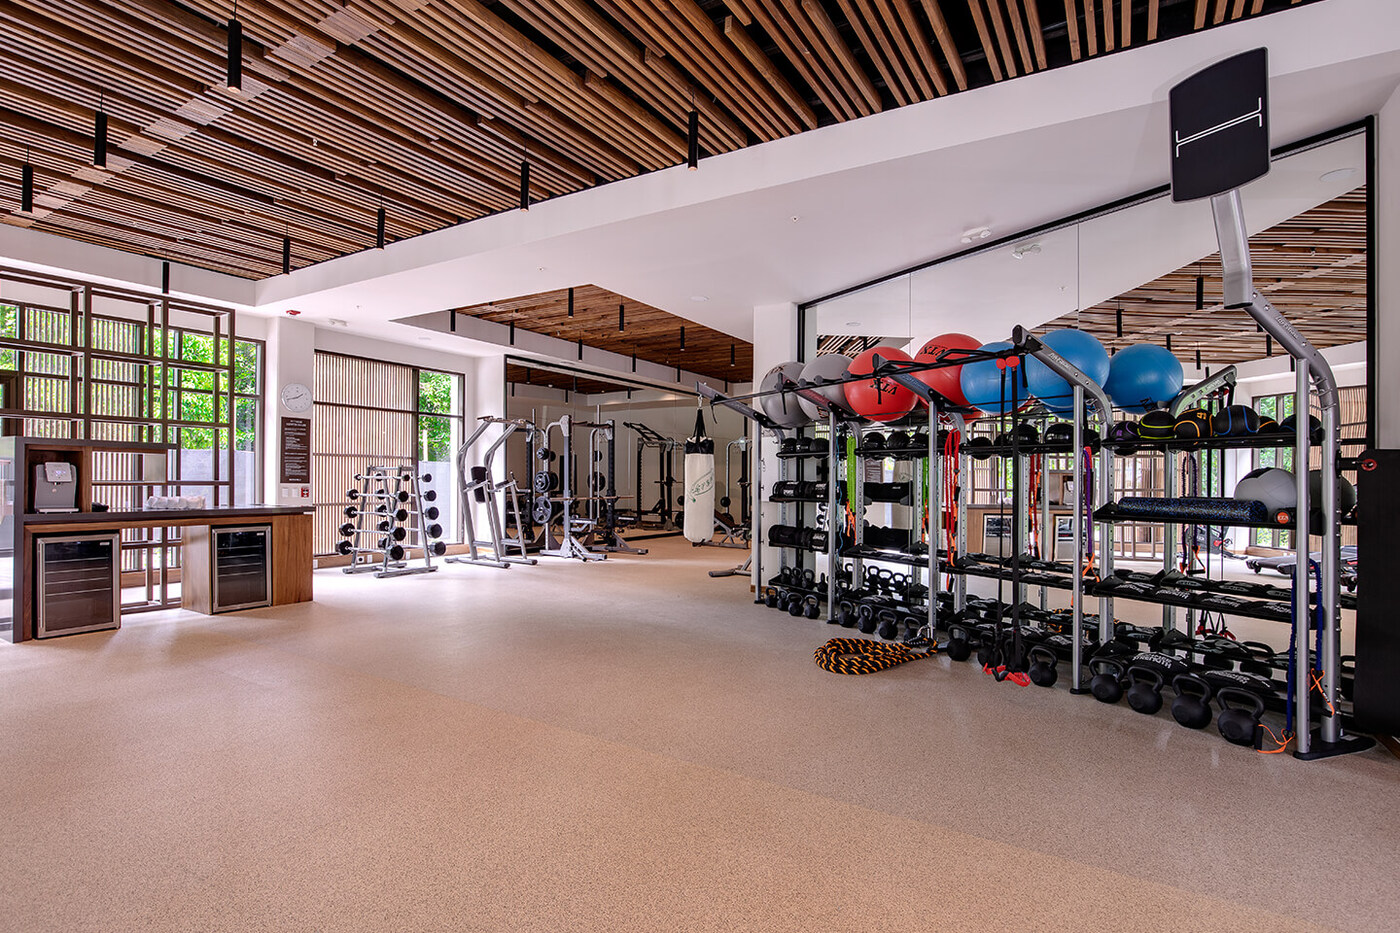 Fitness center equipment and large open space